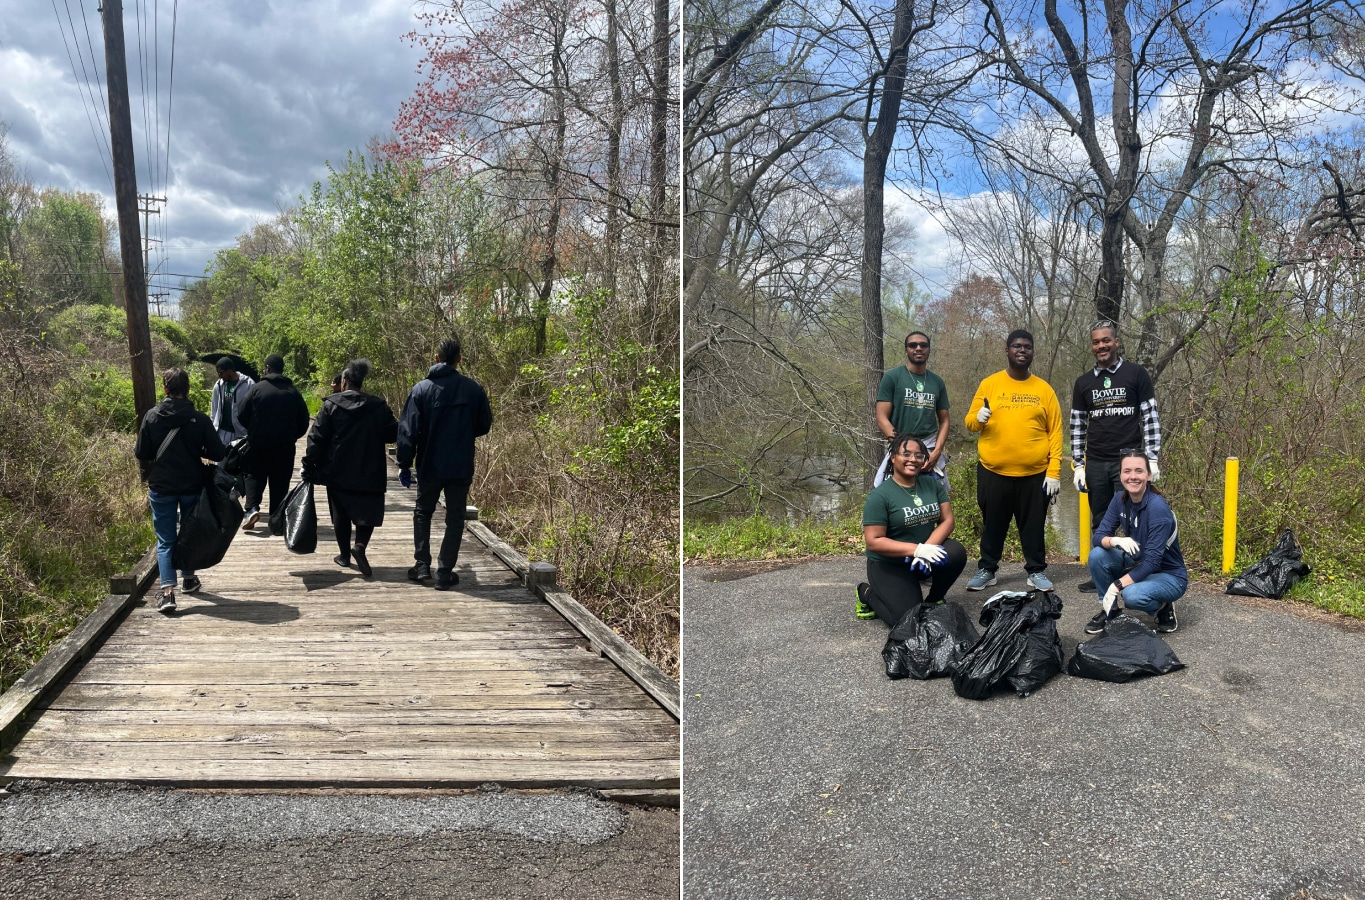 Left, volunteers hauling their collections over a bridge connecting to the Baltimore, Washington, Annapolis trail. Right, volunteers pose with the trash they collected.